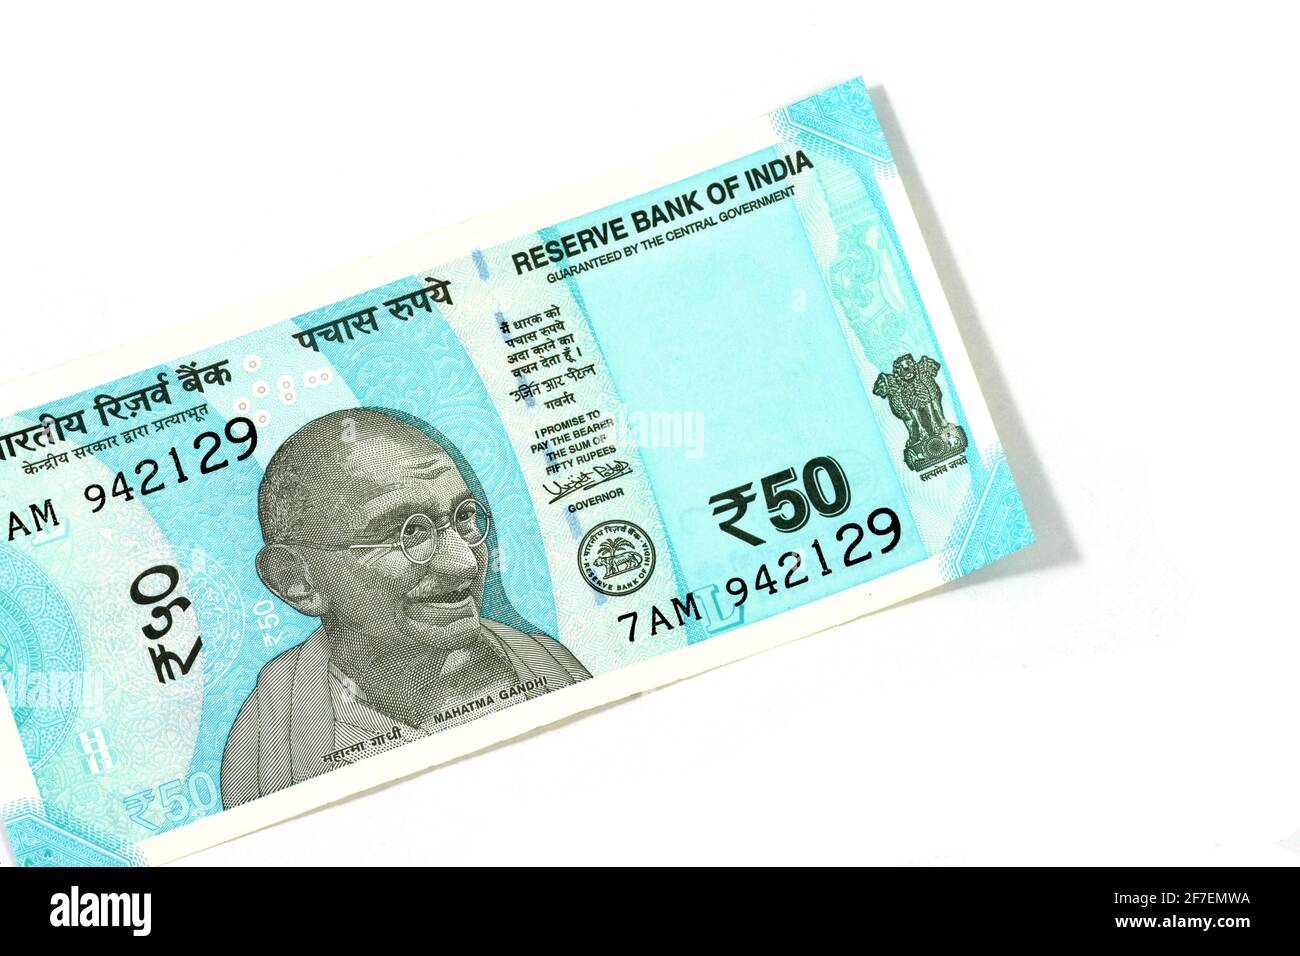 New Indian currency of 50 rupee note Stock Photo - Alamy